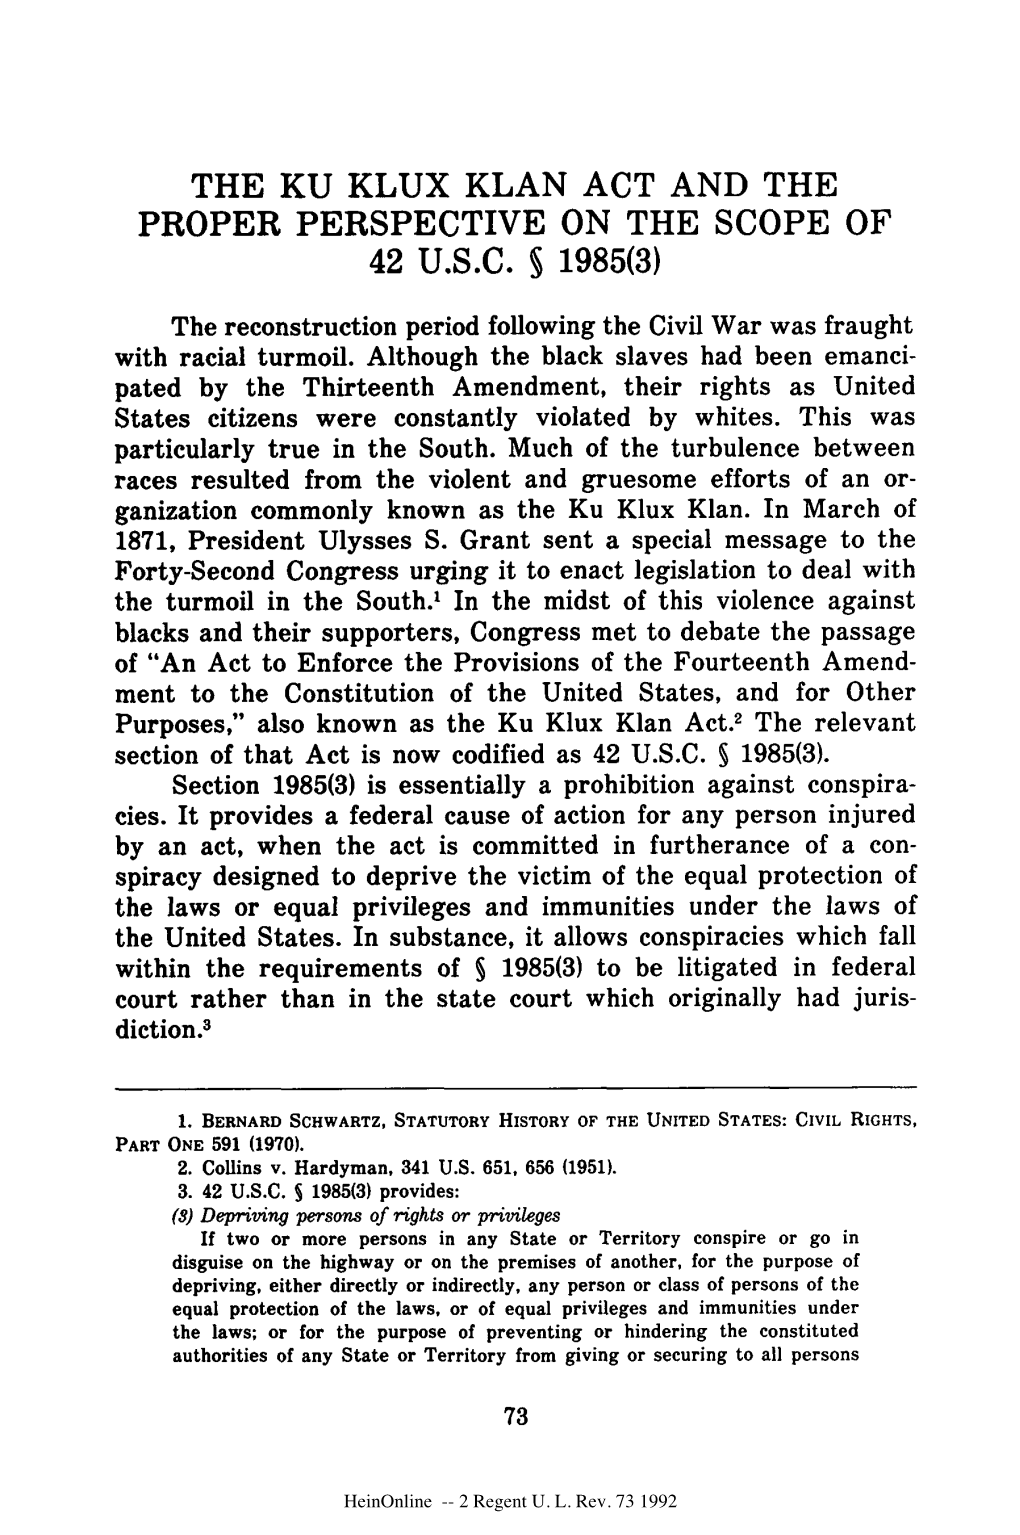 The Ku Klux Klan Act and the Proper Perspective on the Scope of 42 U.S.C